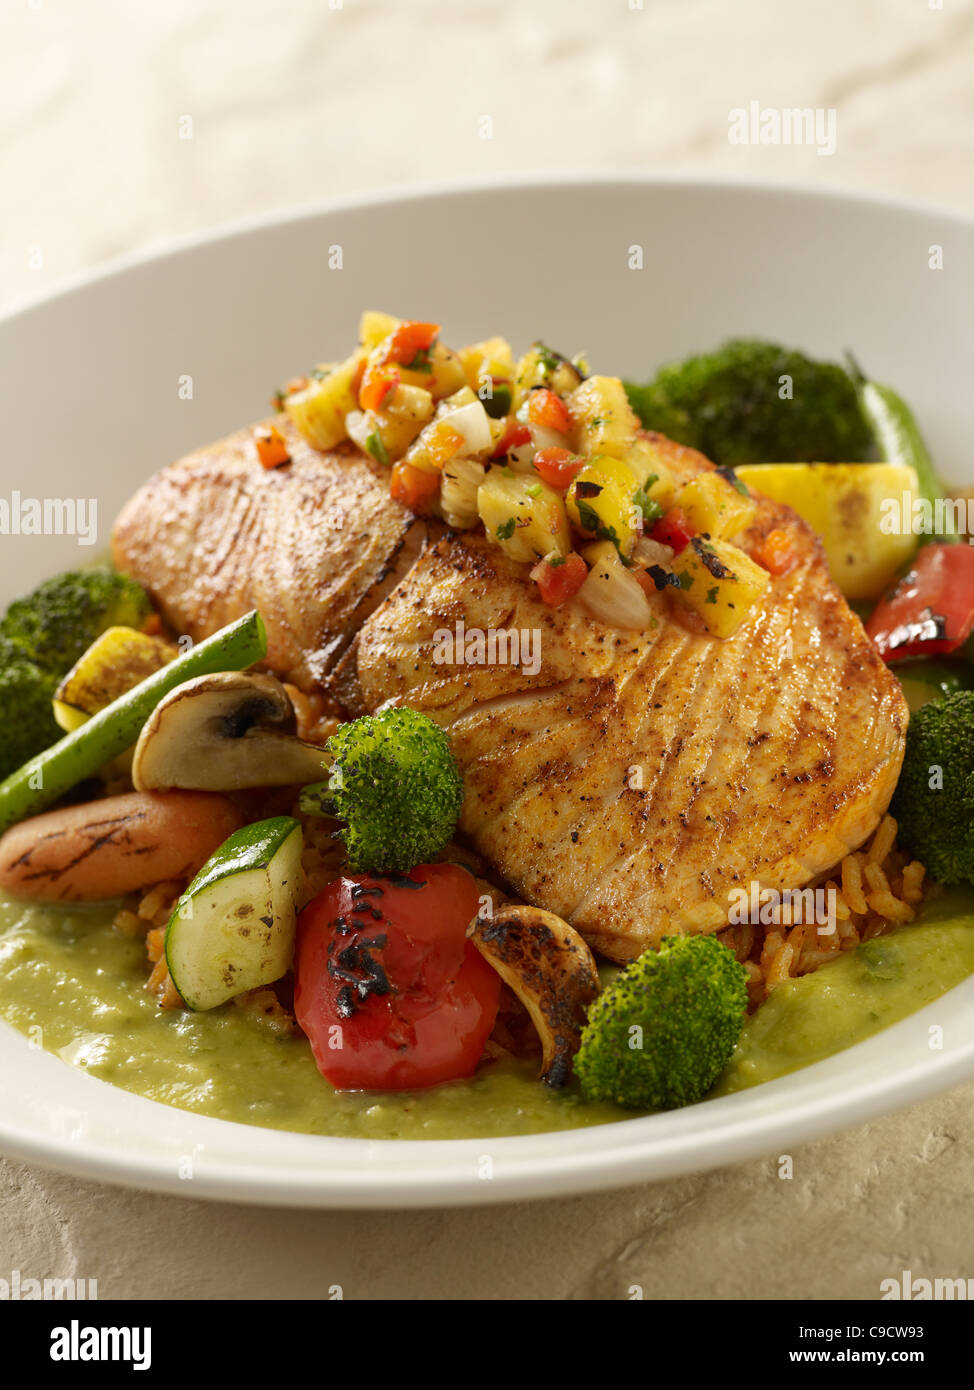 Grilled salmon fillet with a pineapple salsa served over vegetable and rice on a bed of green tomatillo sauce Stock Photo